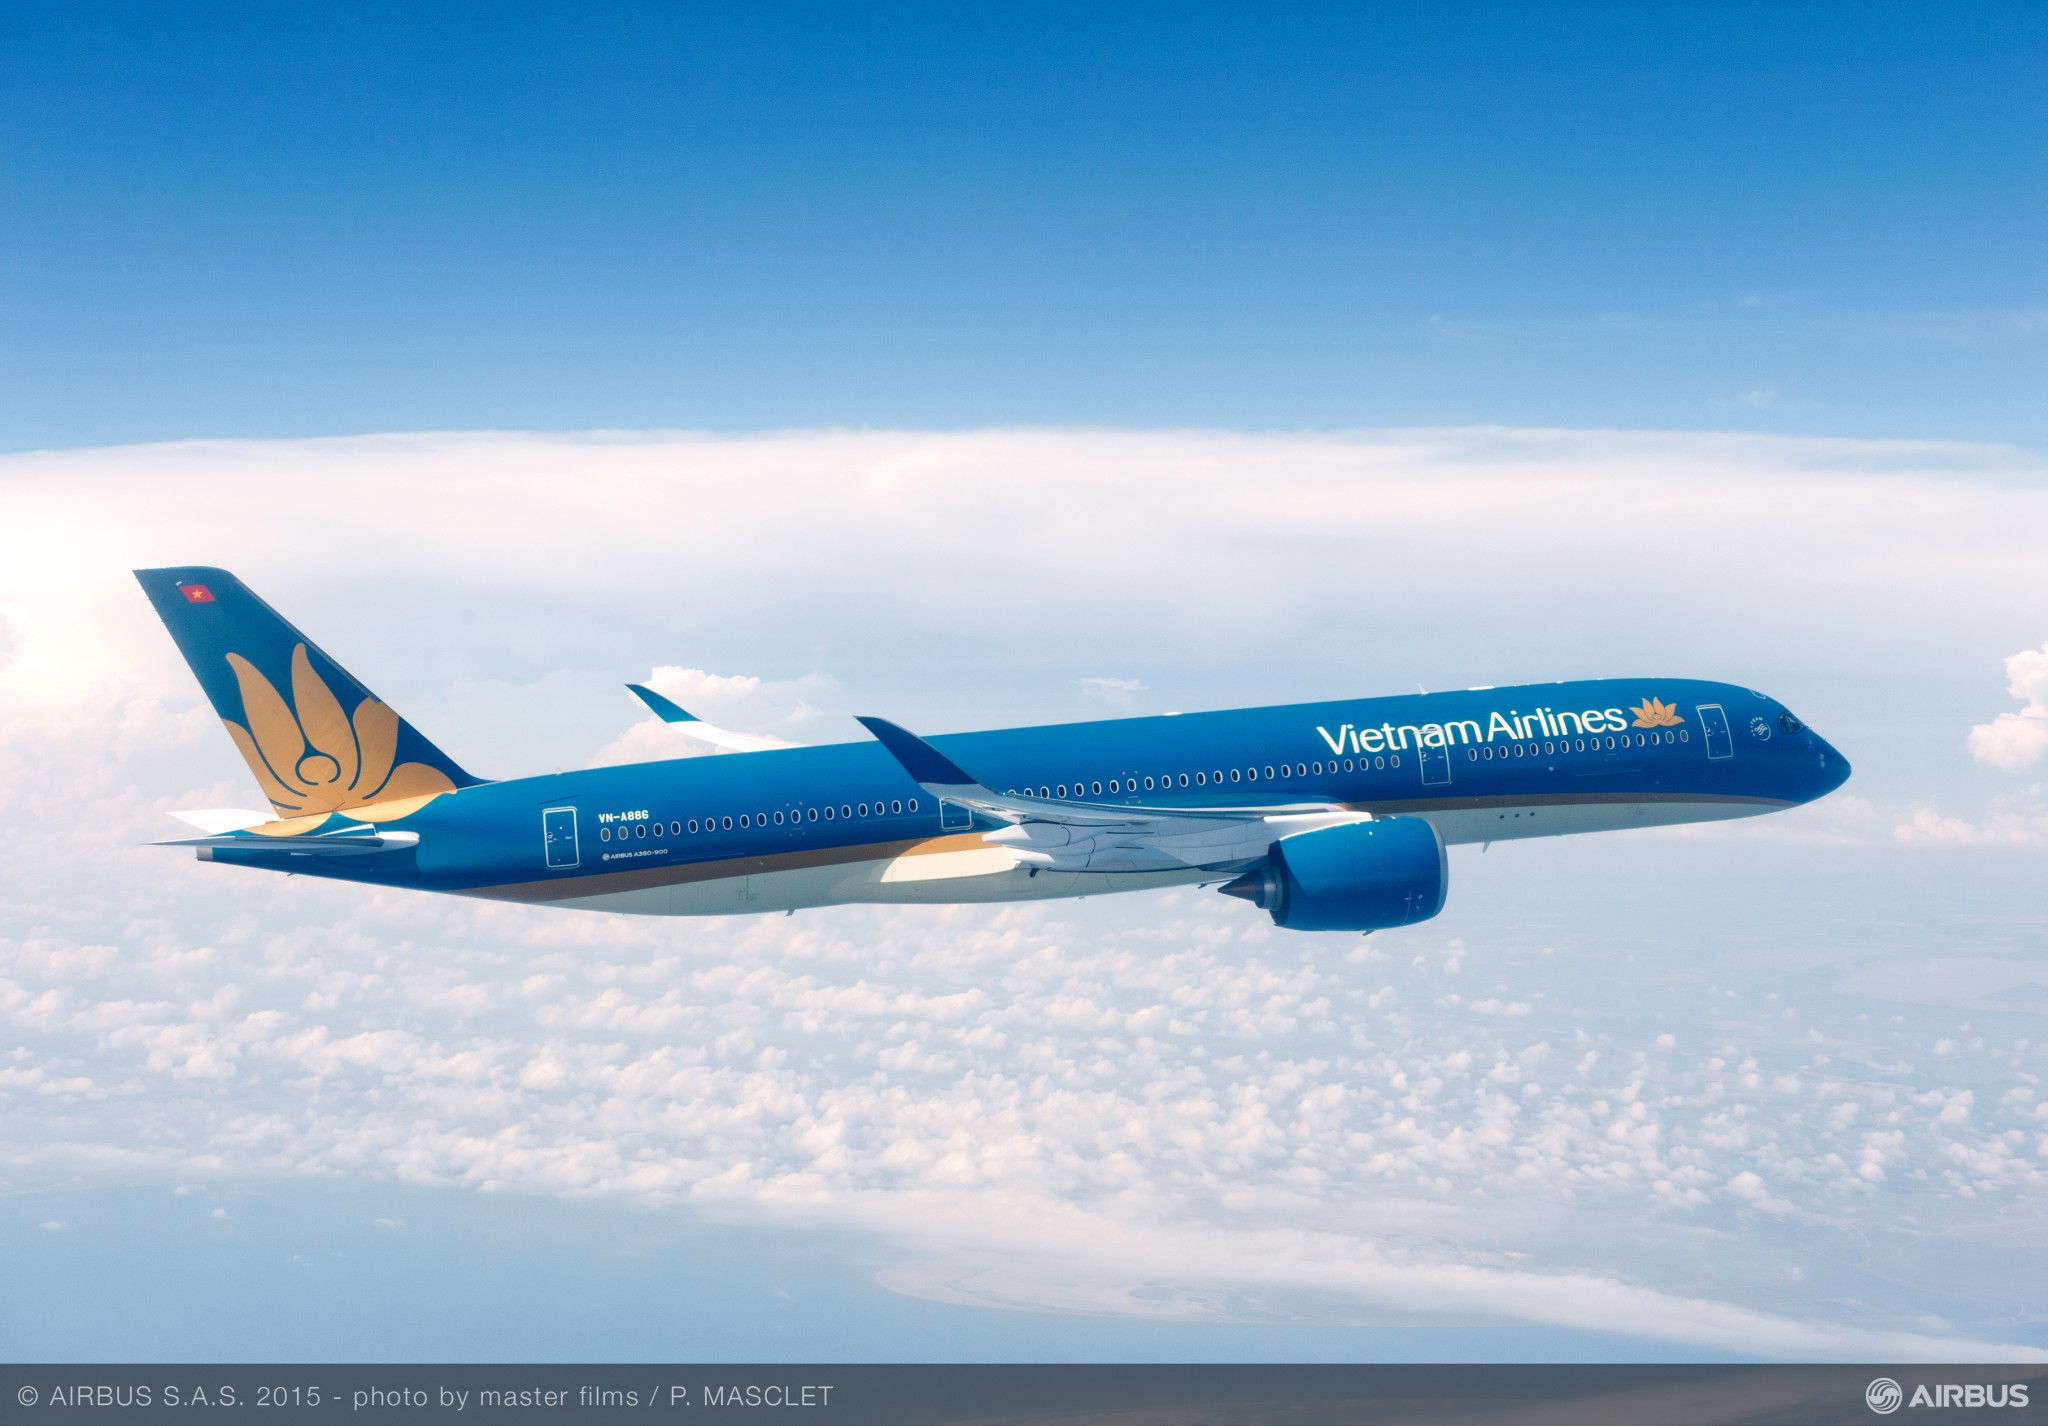 Vietnam Airlines to ramp India flights with daily non-stop services